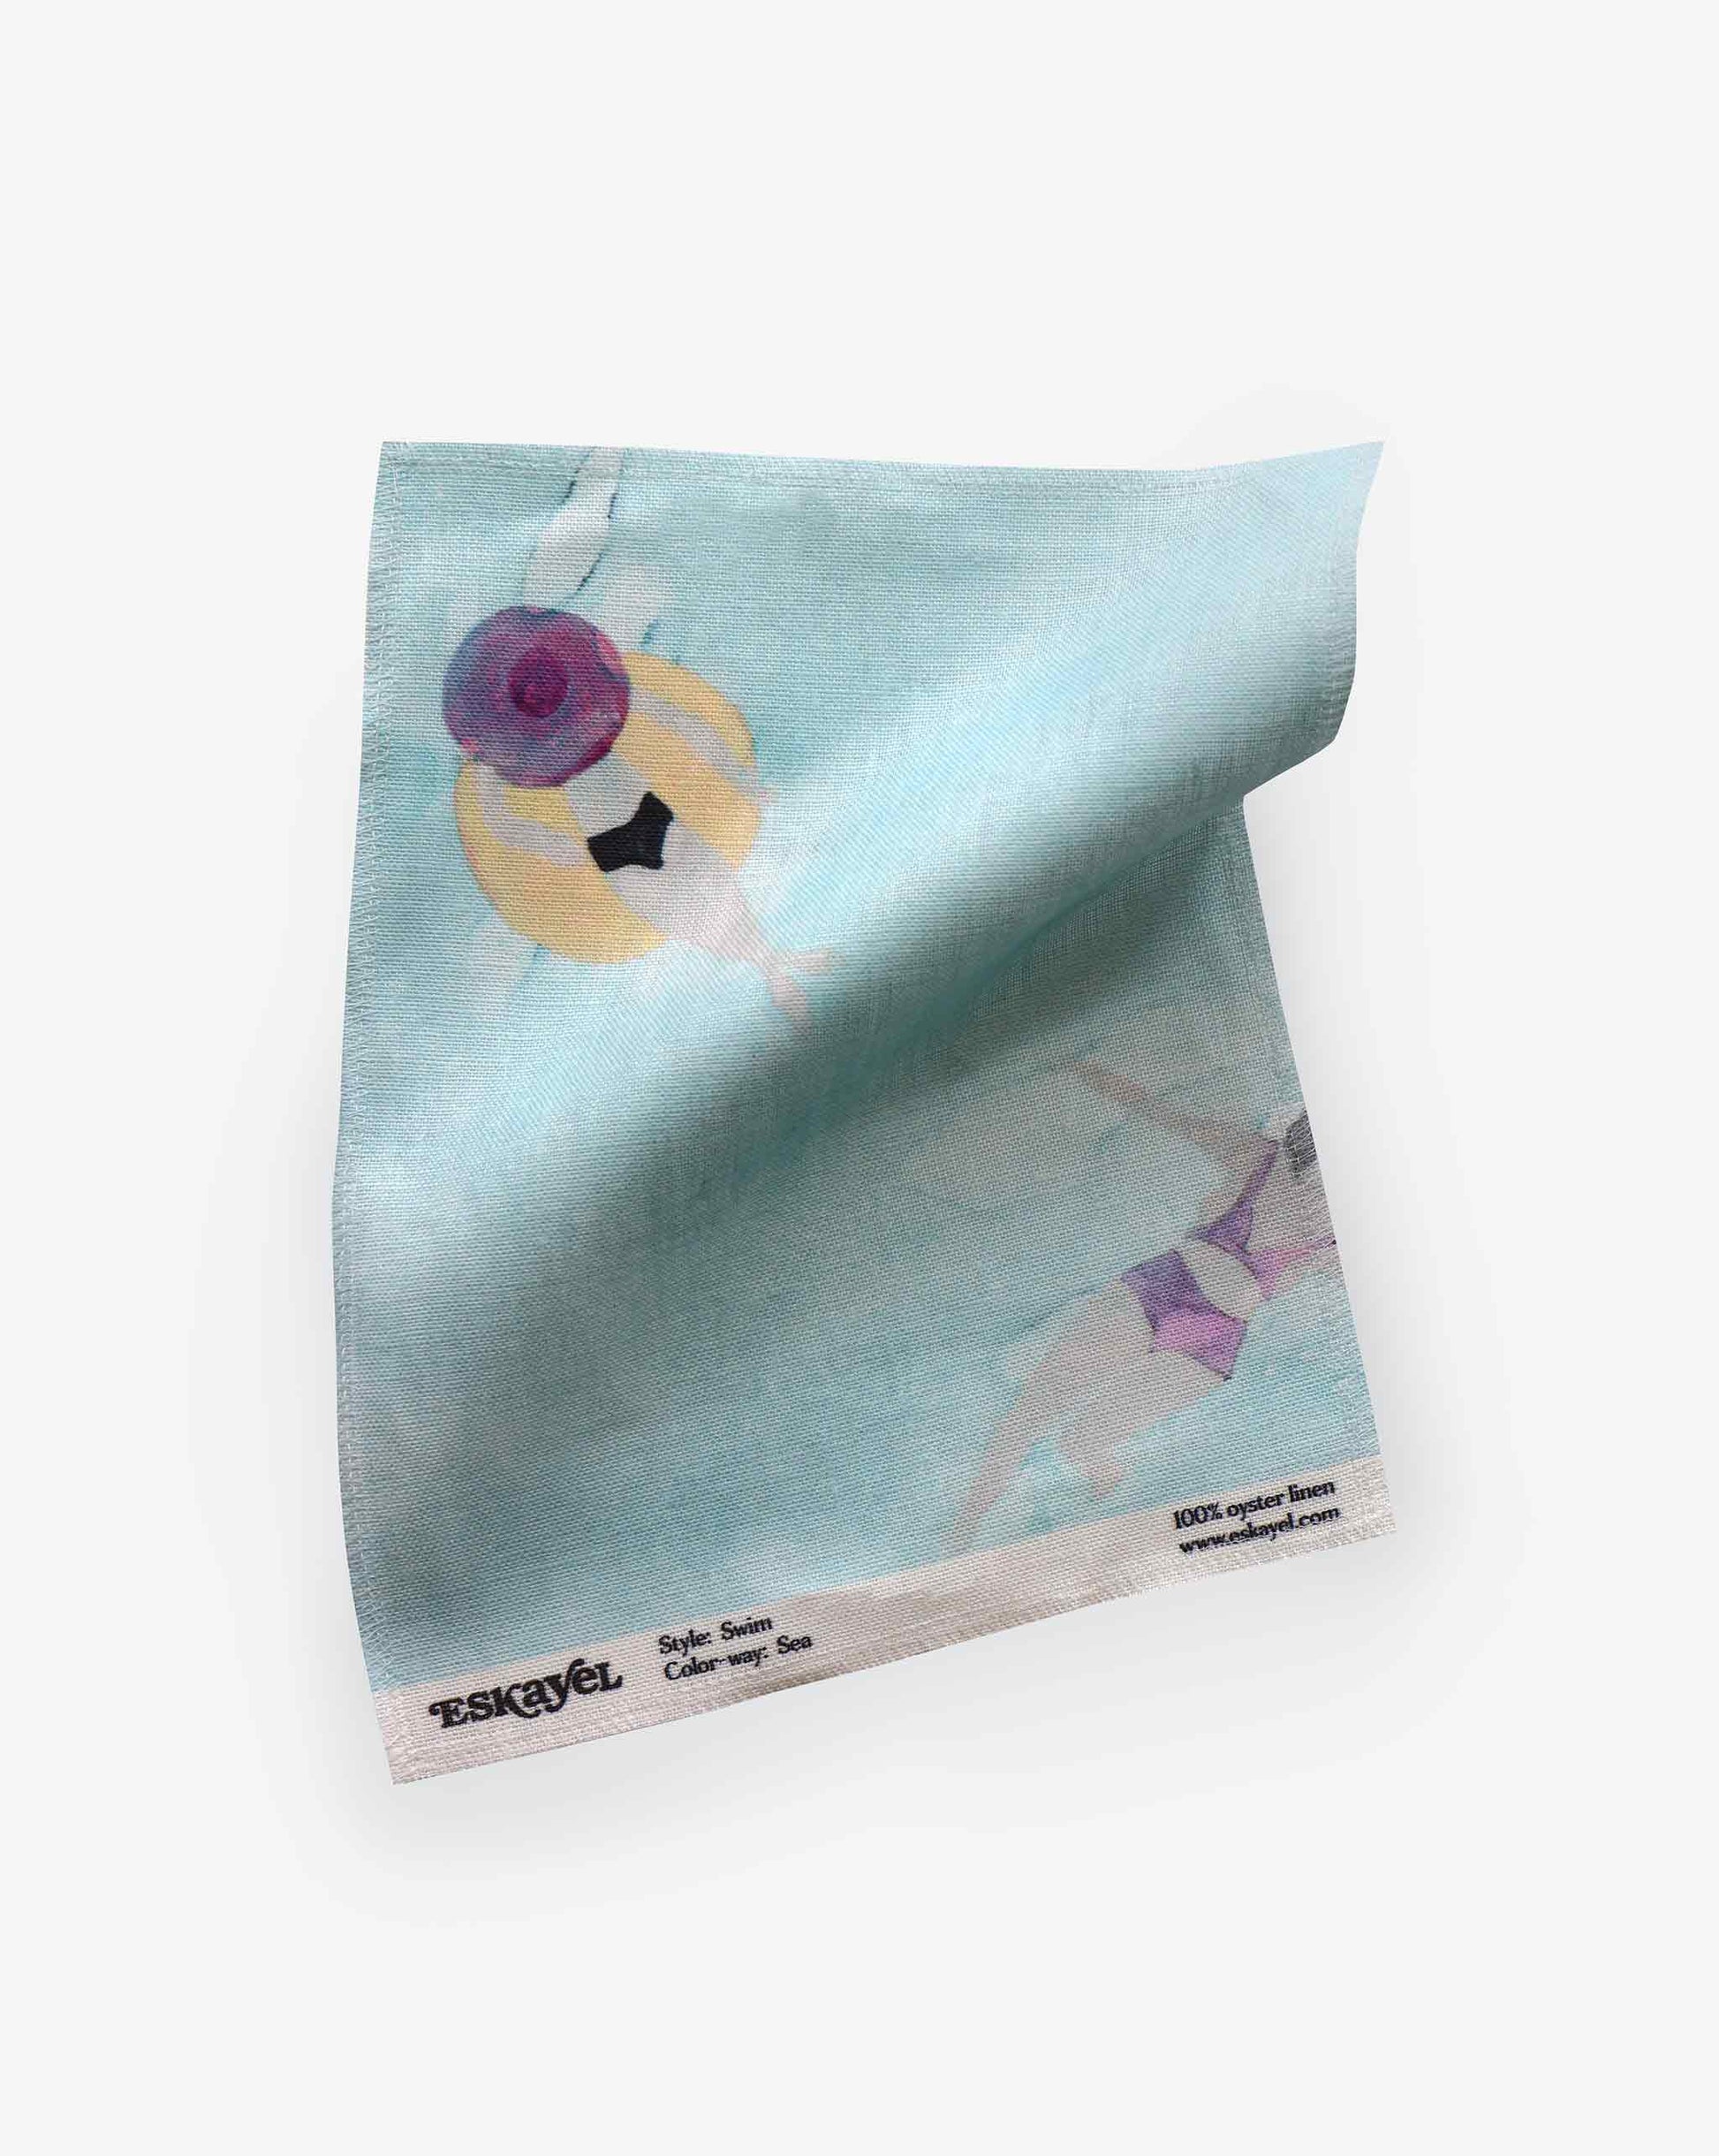 A fabric swatch with our Swim pattern in Sea featuring a design inspired by the sweet feeling of water against the skin with watercolor figures appearing against a light blue background.